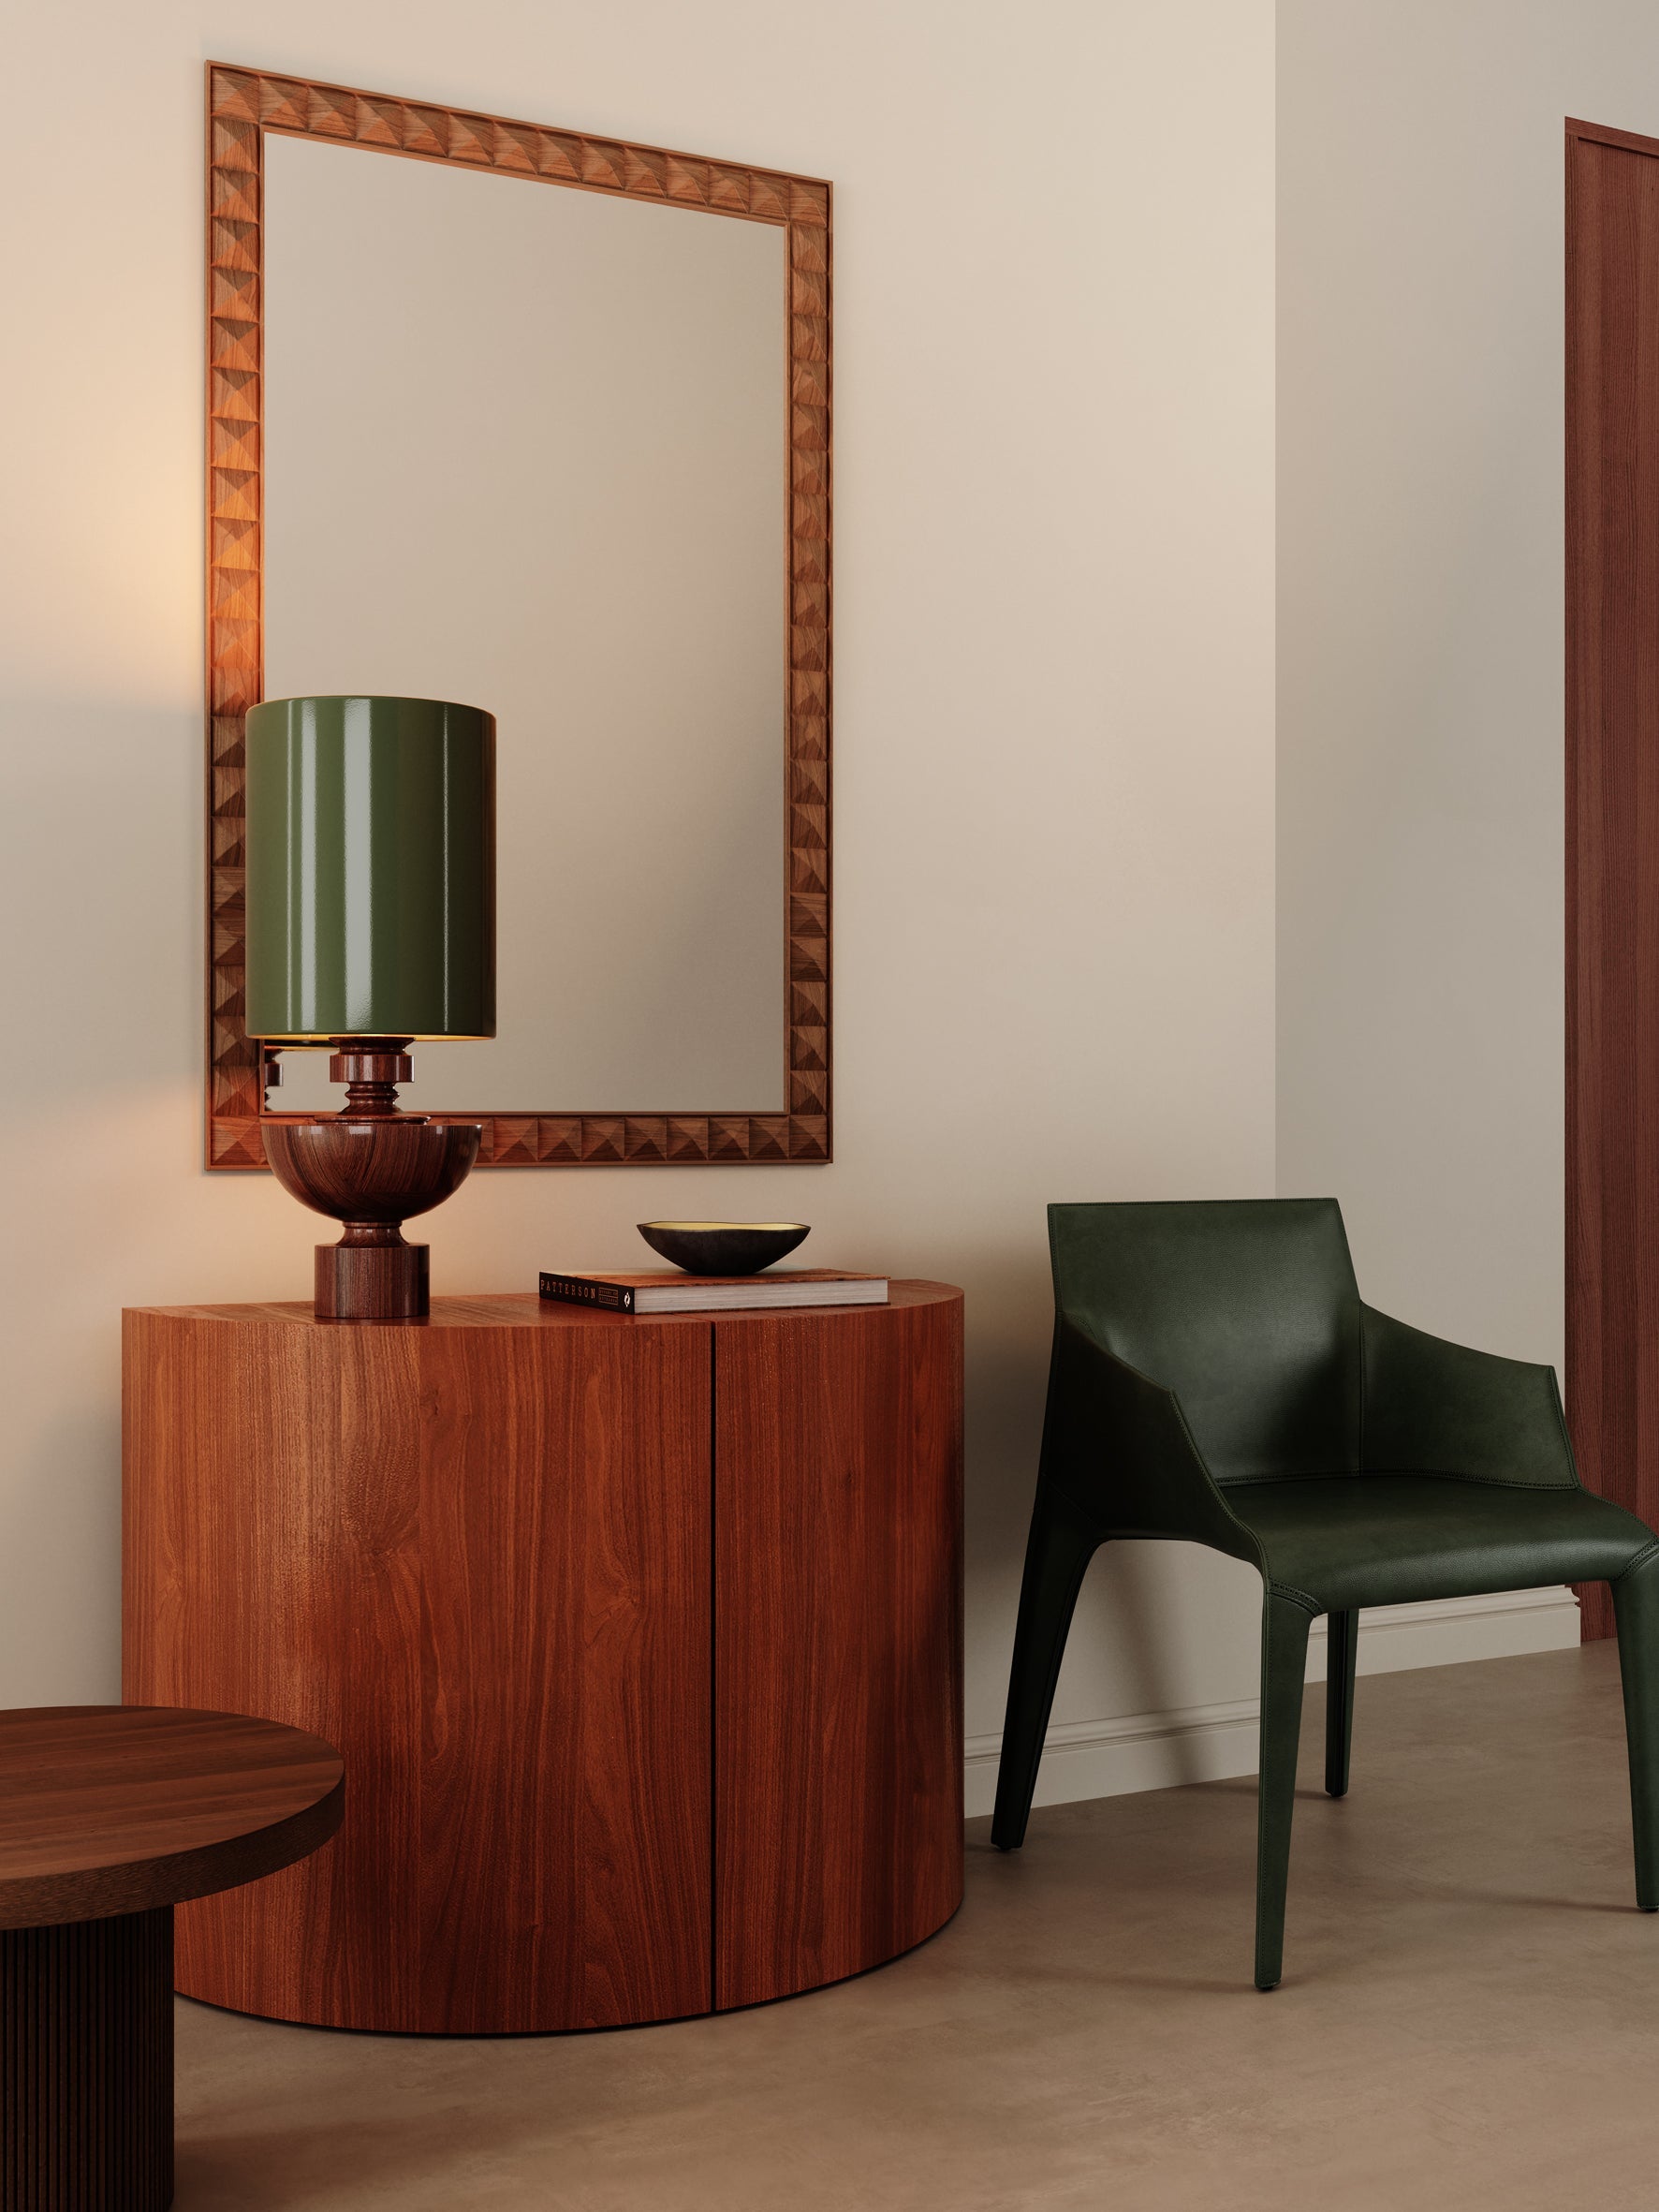 Editions spun wood lamp with + green lacquer shade | Table Lamp | Lights & Lamps | UK | Modern Affordable Designer Lighting